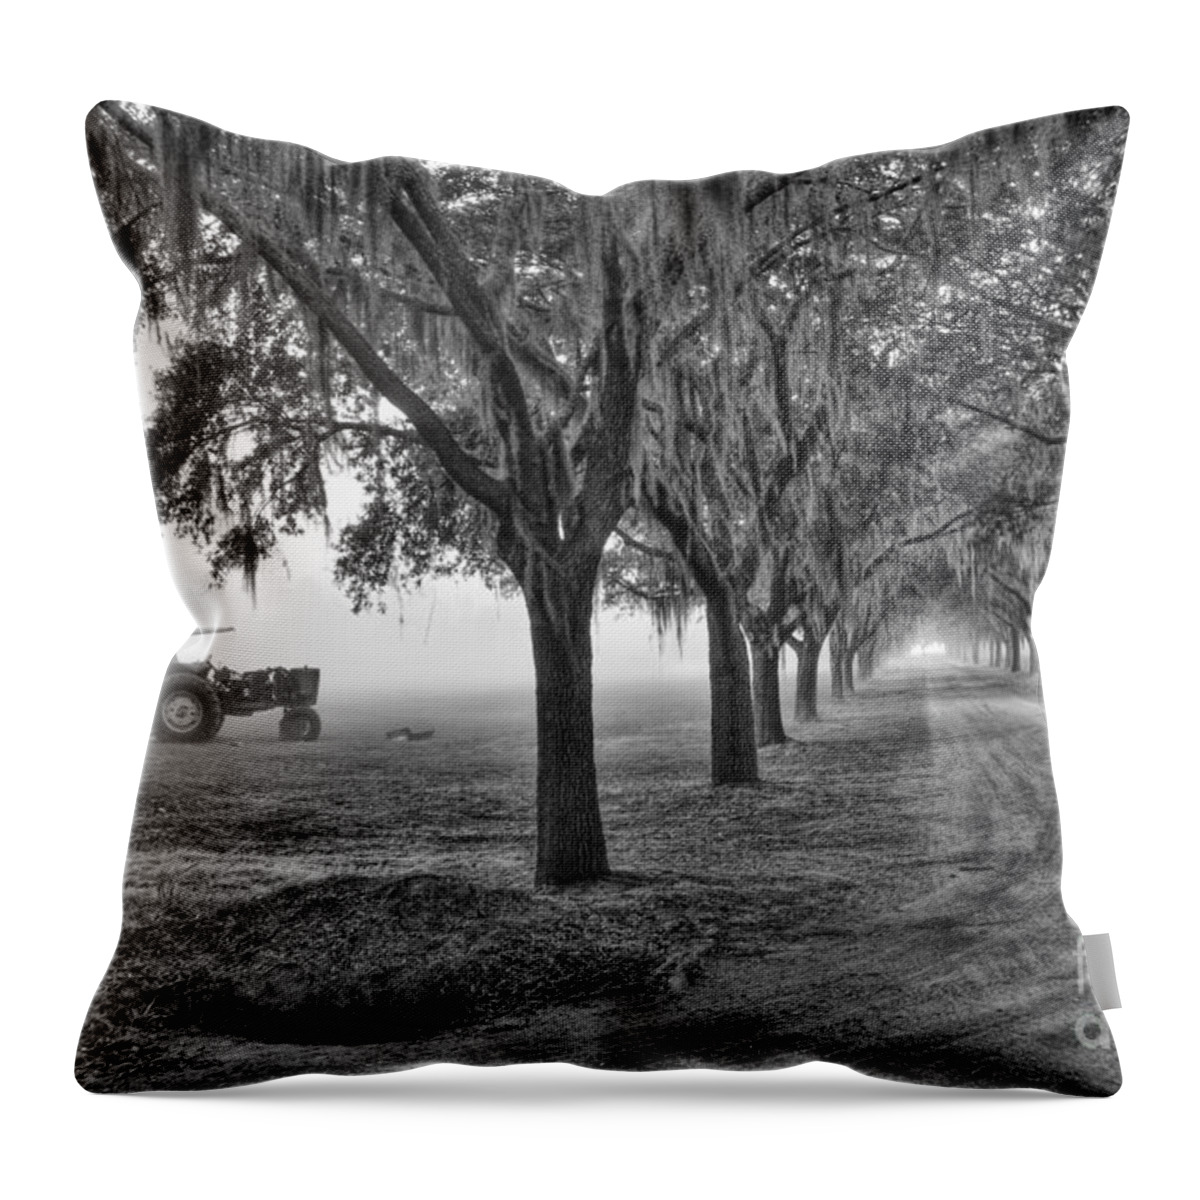 Low Throw Pillow featuring the photograph John Deer Tractor and the Avenue of Oaks by Scott Hansen